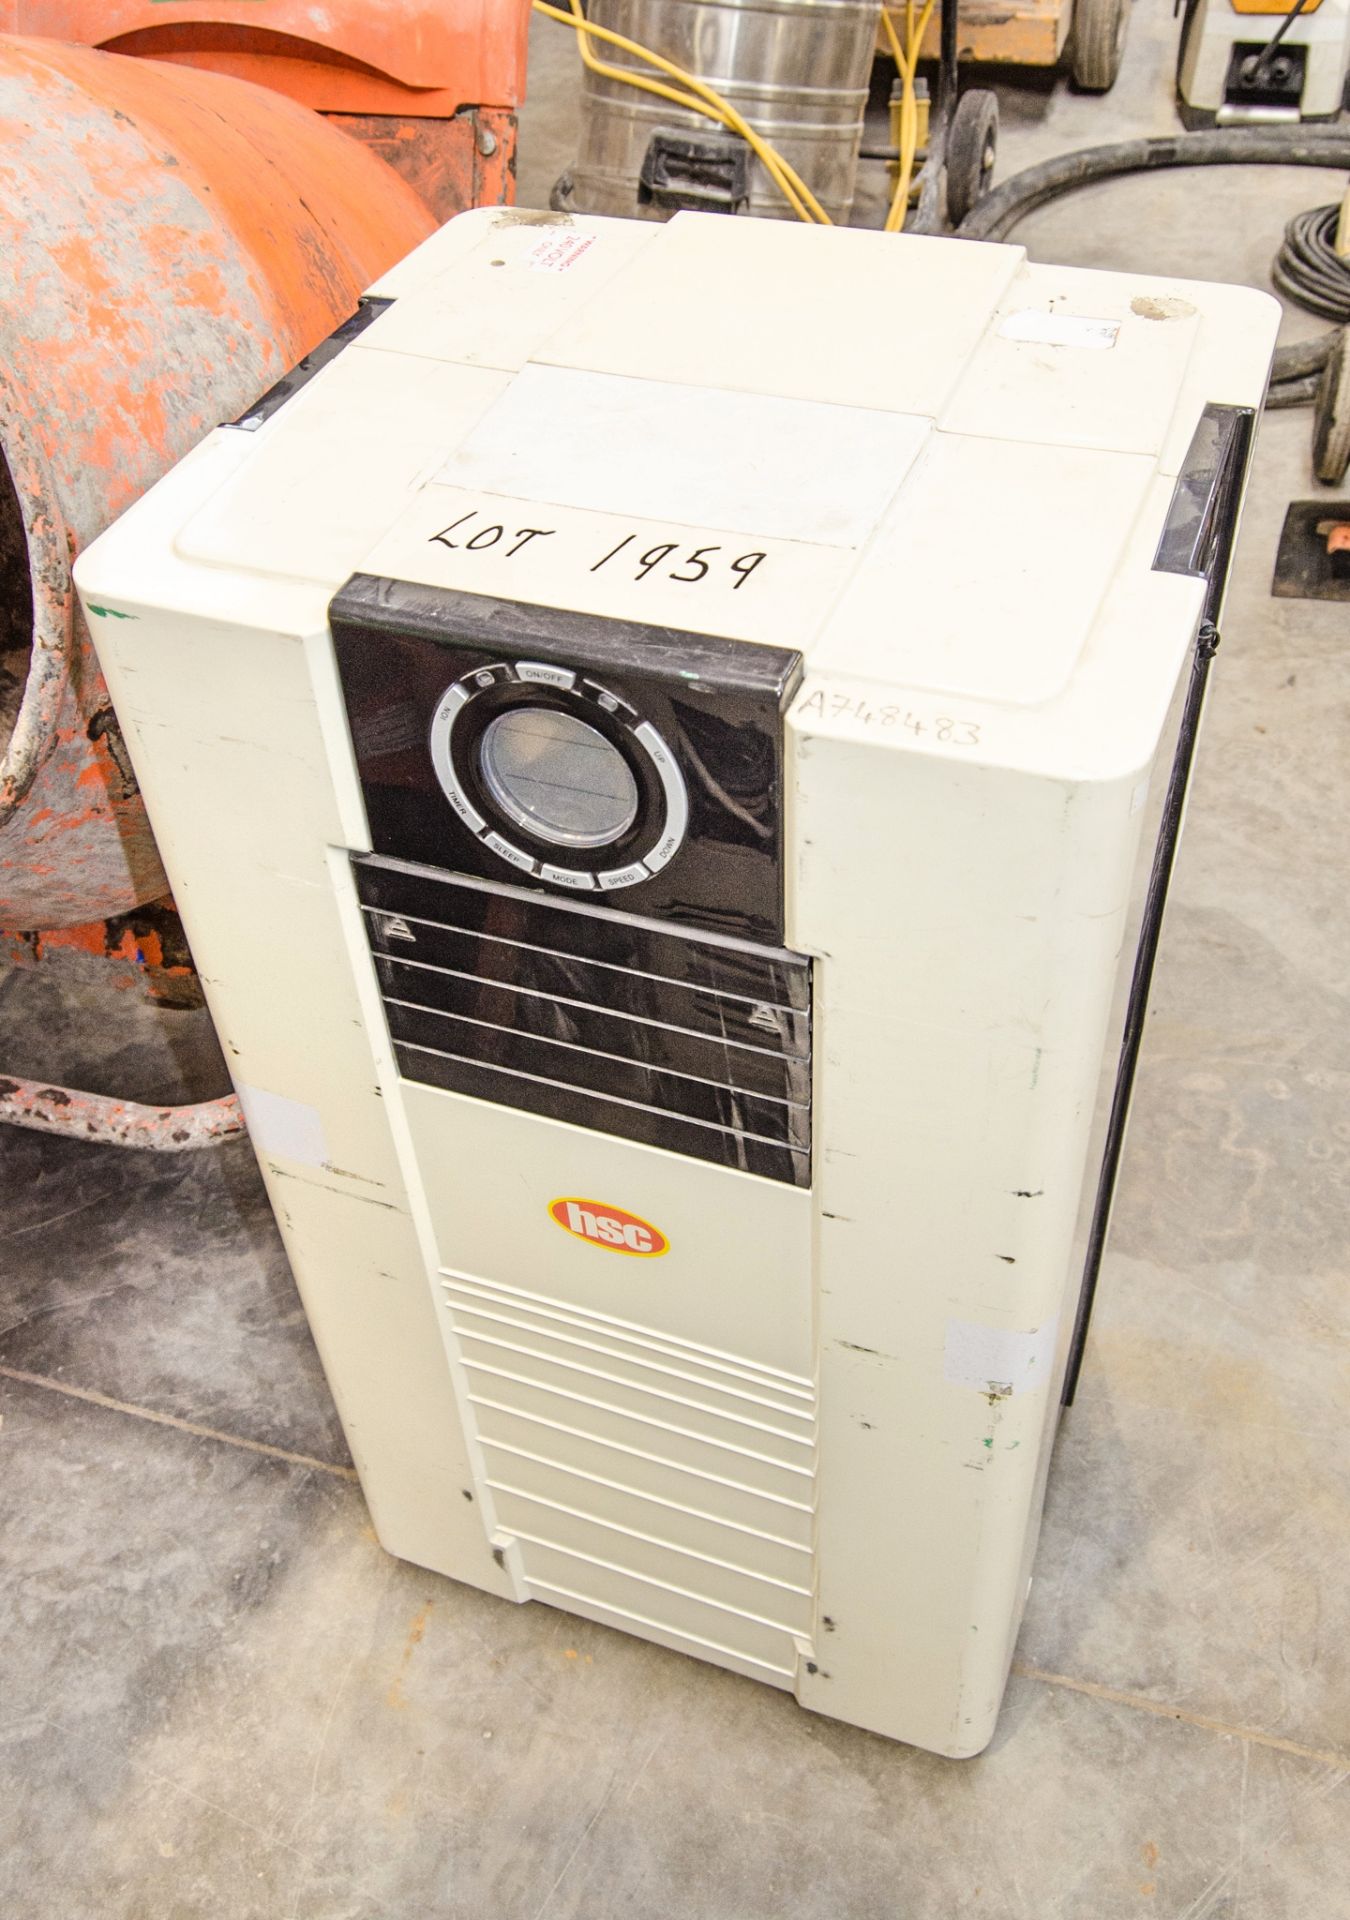 HSC 240v air conditioning unit A748483